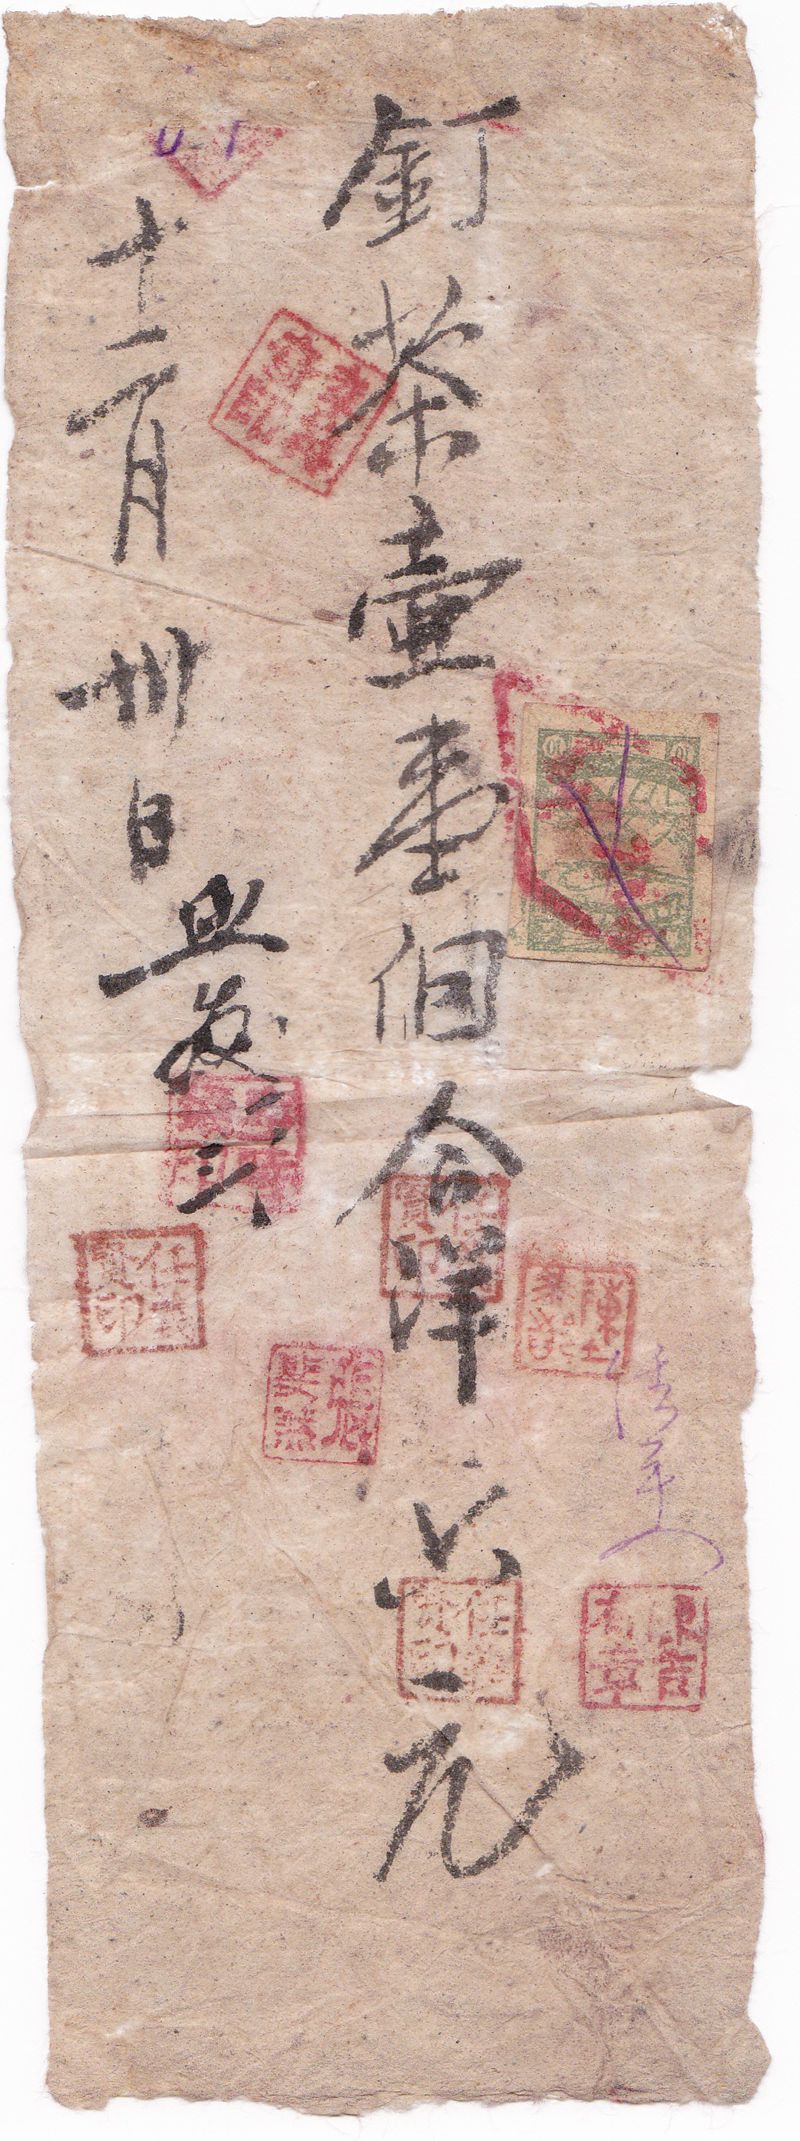 R2032, Revenue Stamp Sheet of China Sinkiang, 10 Cents, 1948